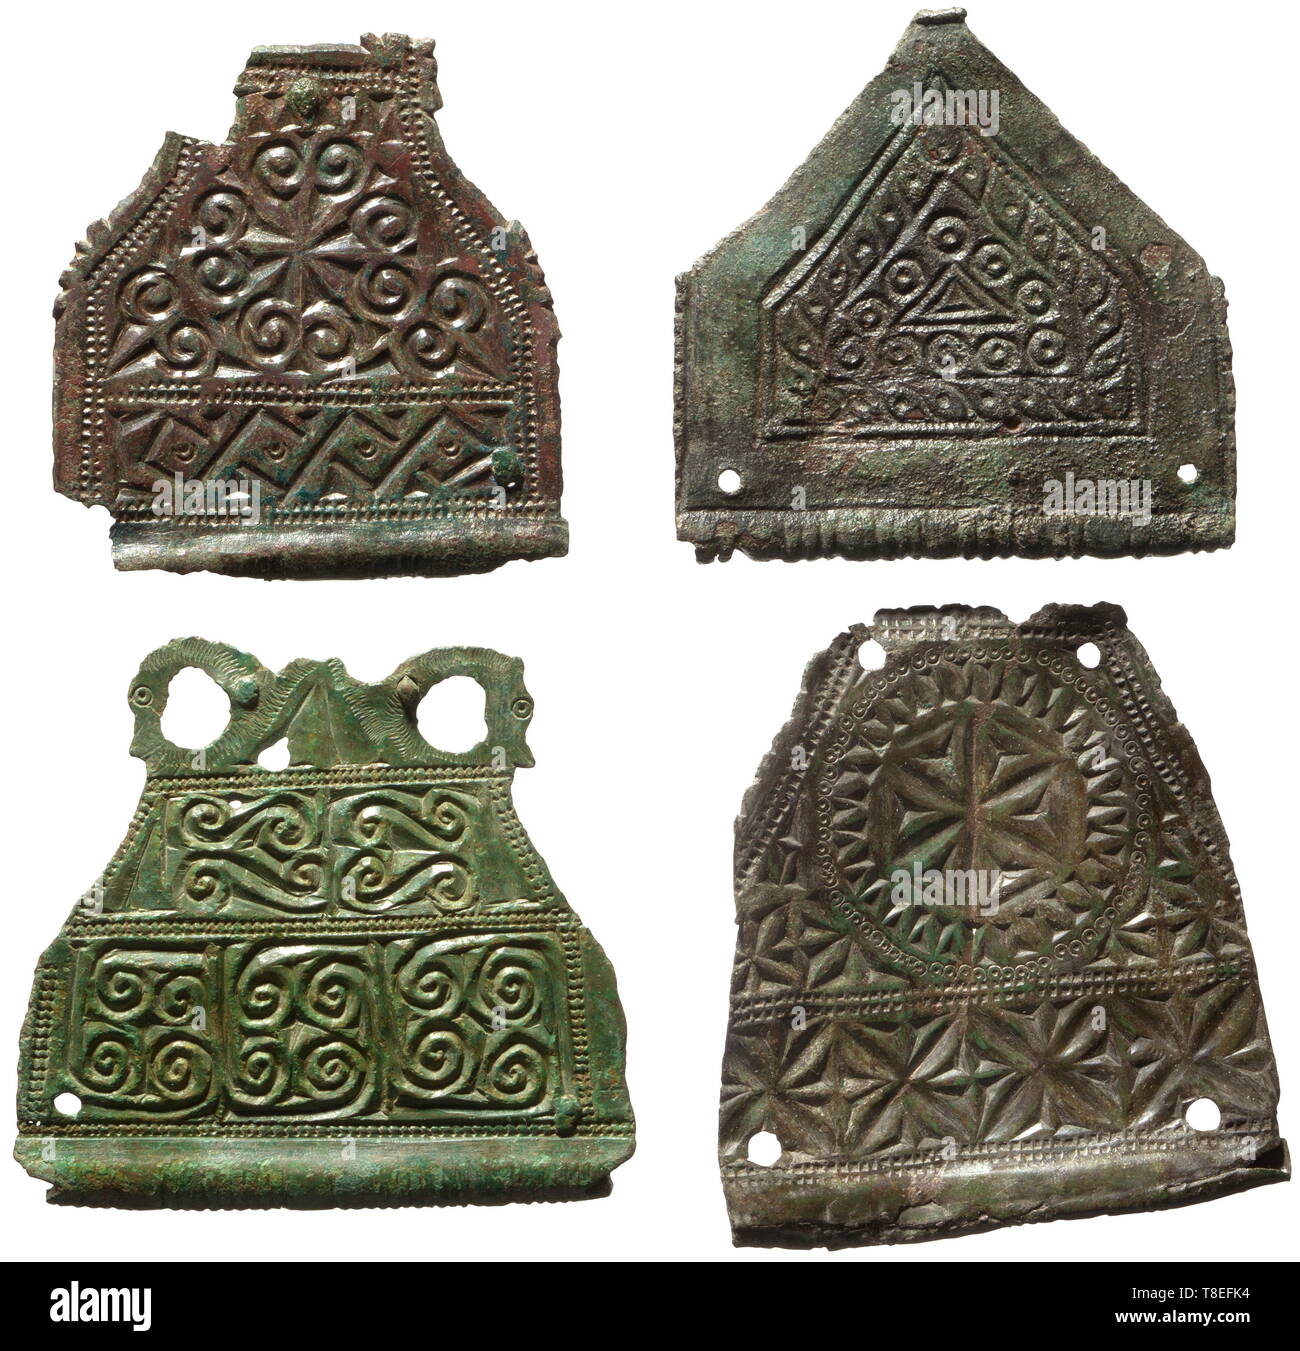 Four Roman fittings for a military belt 4th/5th century AD. Bronze with patina in different shades of green. Delicate fittings with graphical and geometrical decorations. Width 6 to 7 cm. Provenance: South German private collection, 1970s and later. historic, historical, Roman Empire, ancient world, ancient times, ancient world, Additional-Rights-Clearance-Info-Not-Available Stock Photo